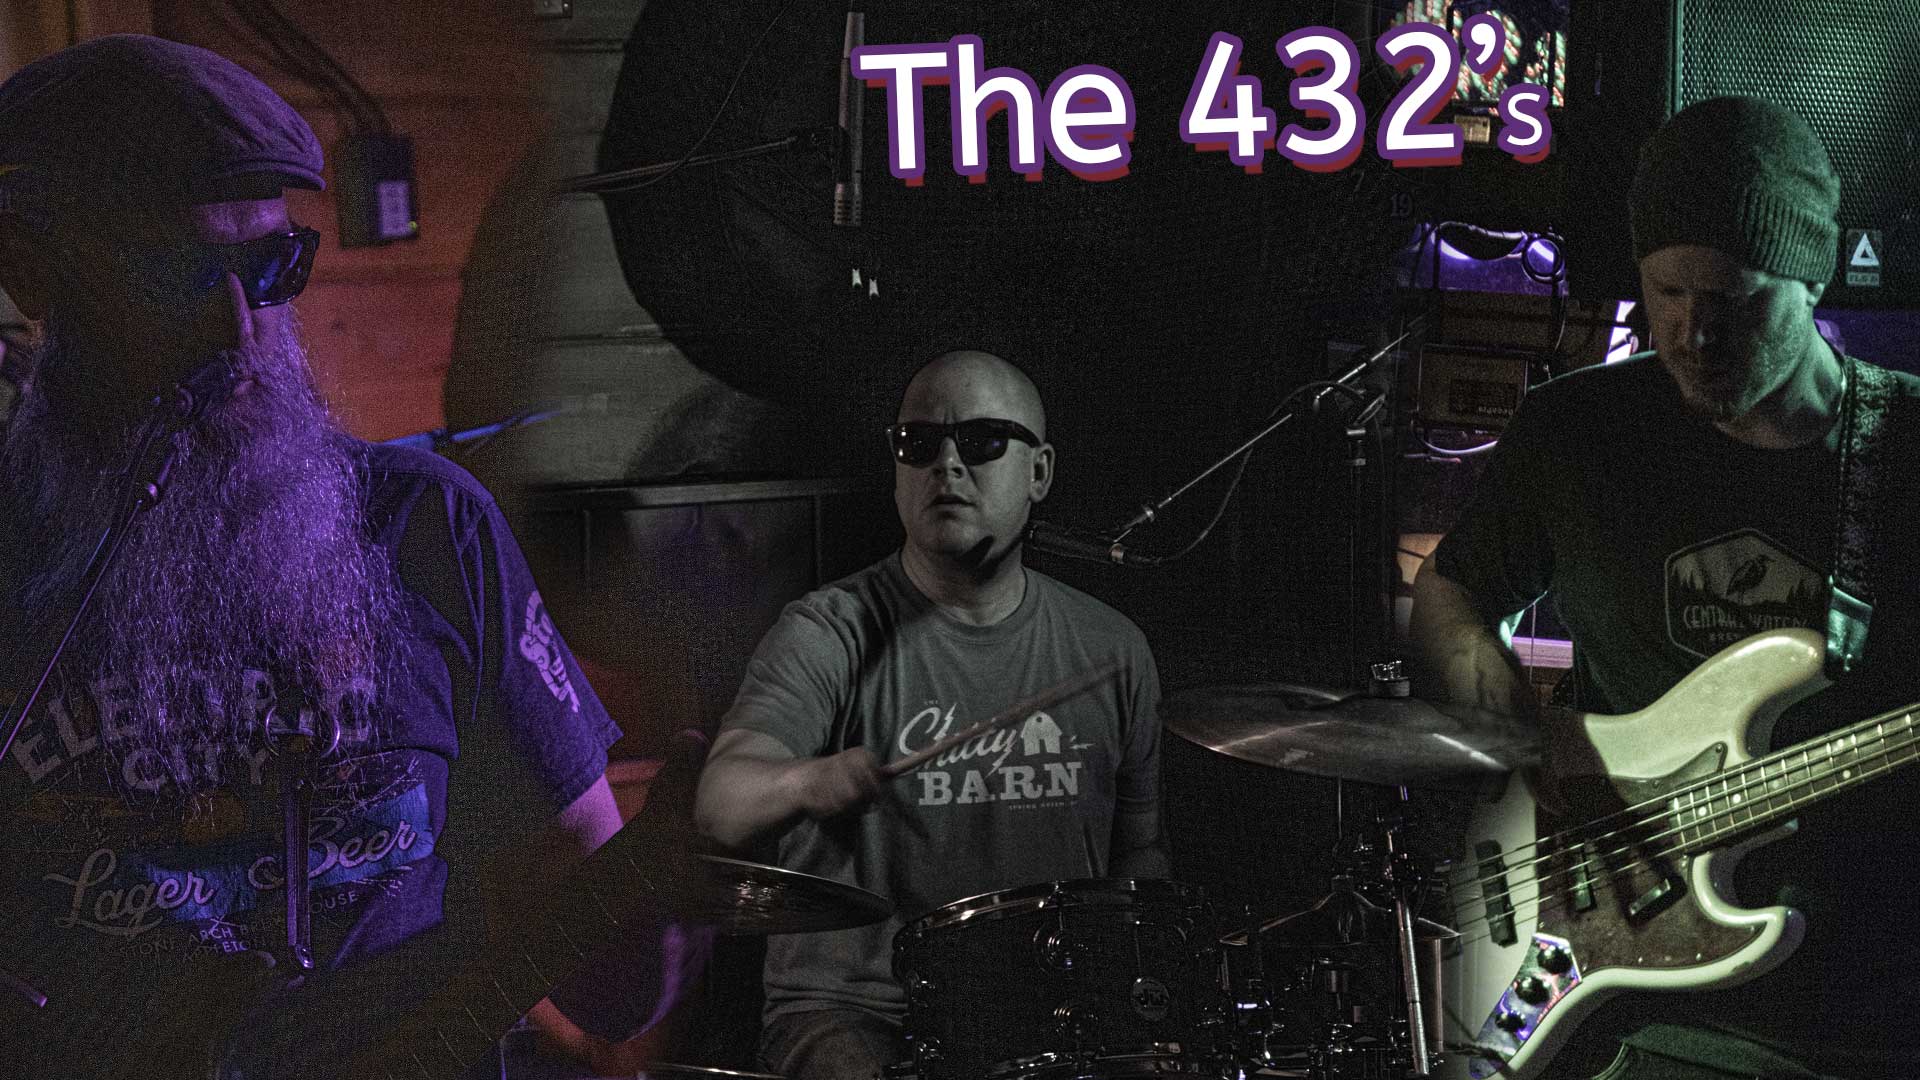 the 432's band at the Hawks Nest